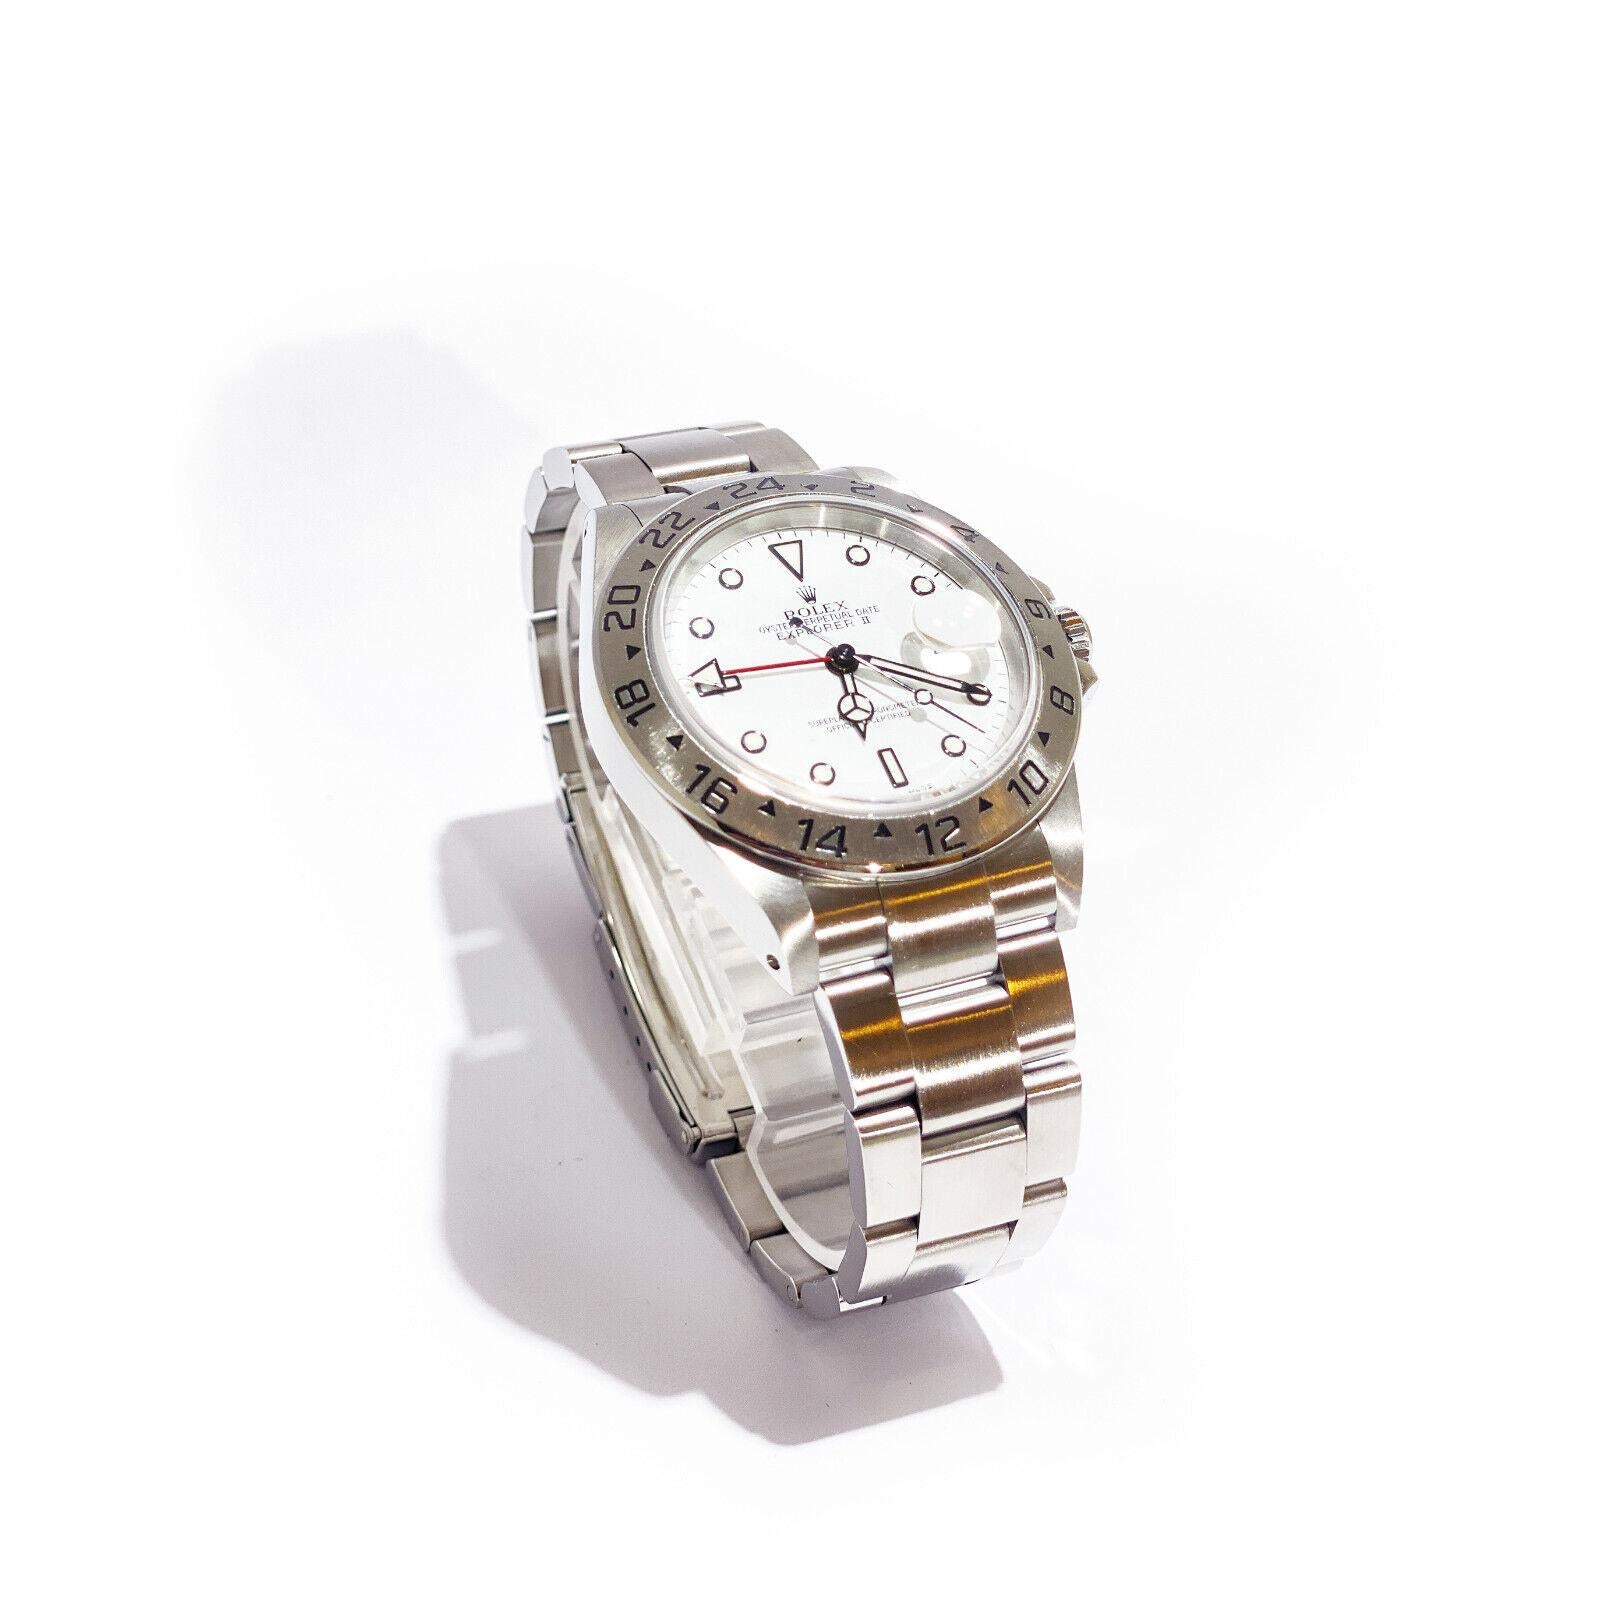 Rolex Oyster Explorer II  42mm White Dial Automatic Men's Watch  - 16570

Style Number: R16570A50B7879

Serial #: P914417

Dial: White

Year: 2002

Condition: Pre-Owned

Model: M16570 Rolex Oyster Explorer II

Case Material: Stainless steel

Bezel: